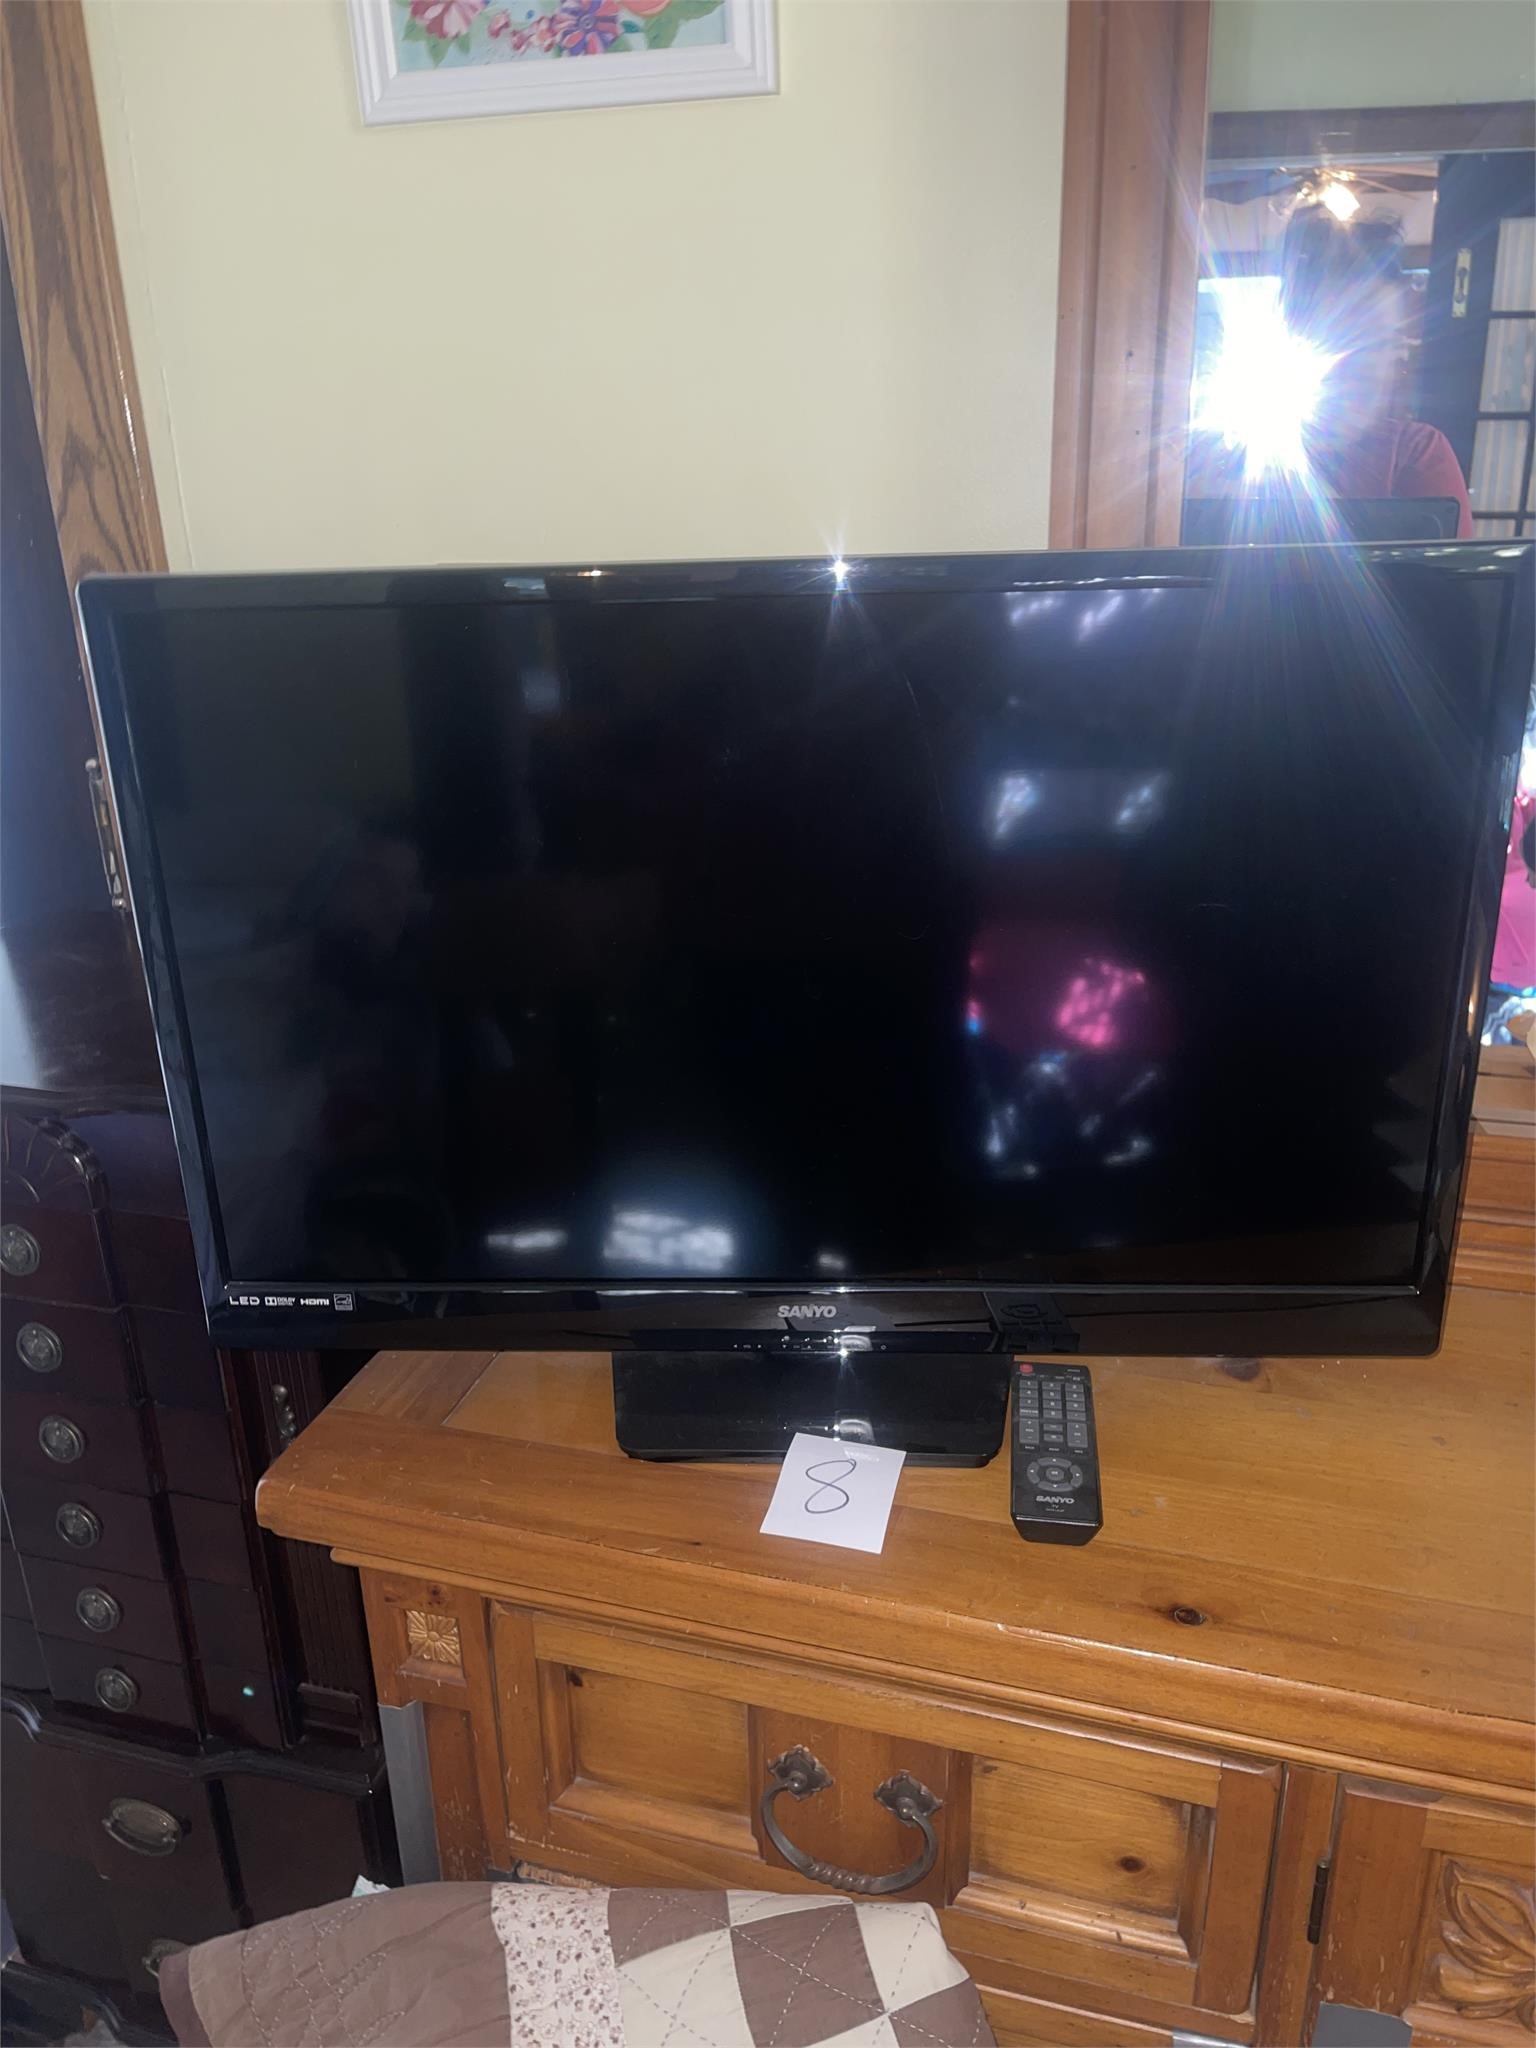 32" Sanyo TV with remote